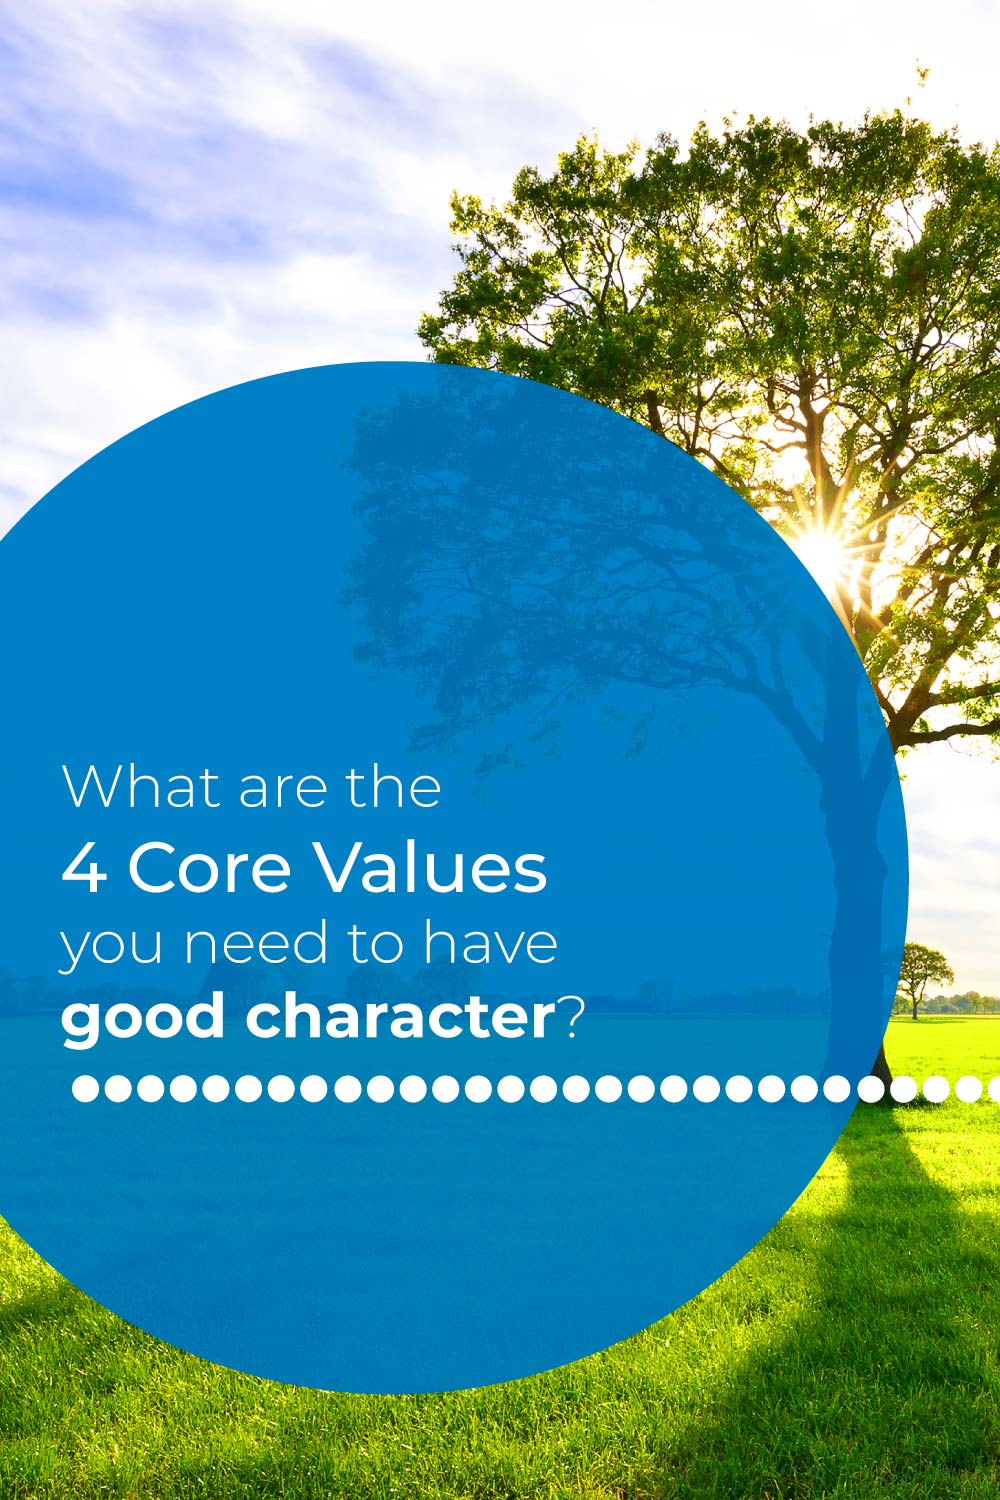 4 Core Values someone needs to have good character and decency